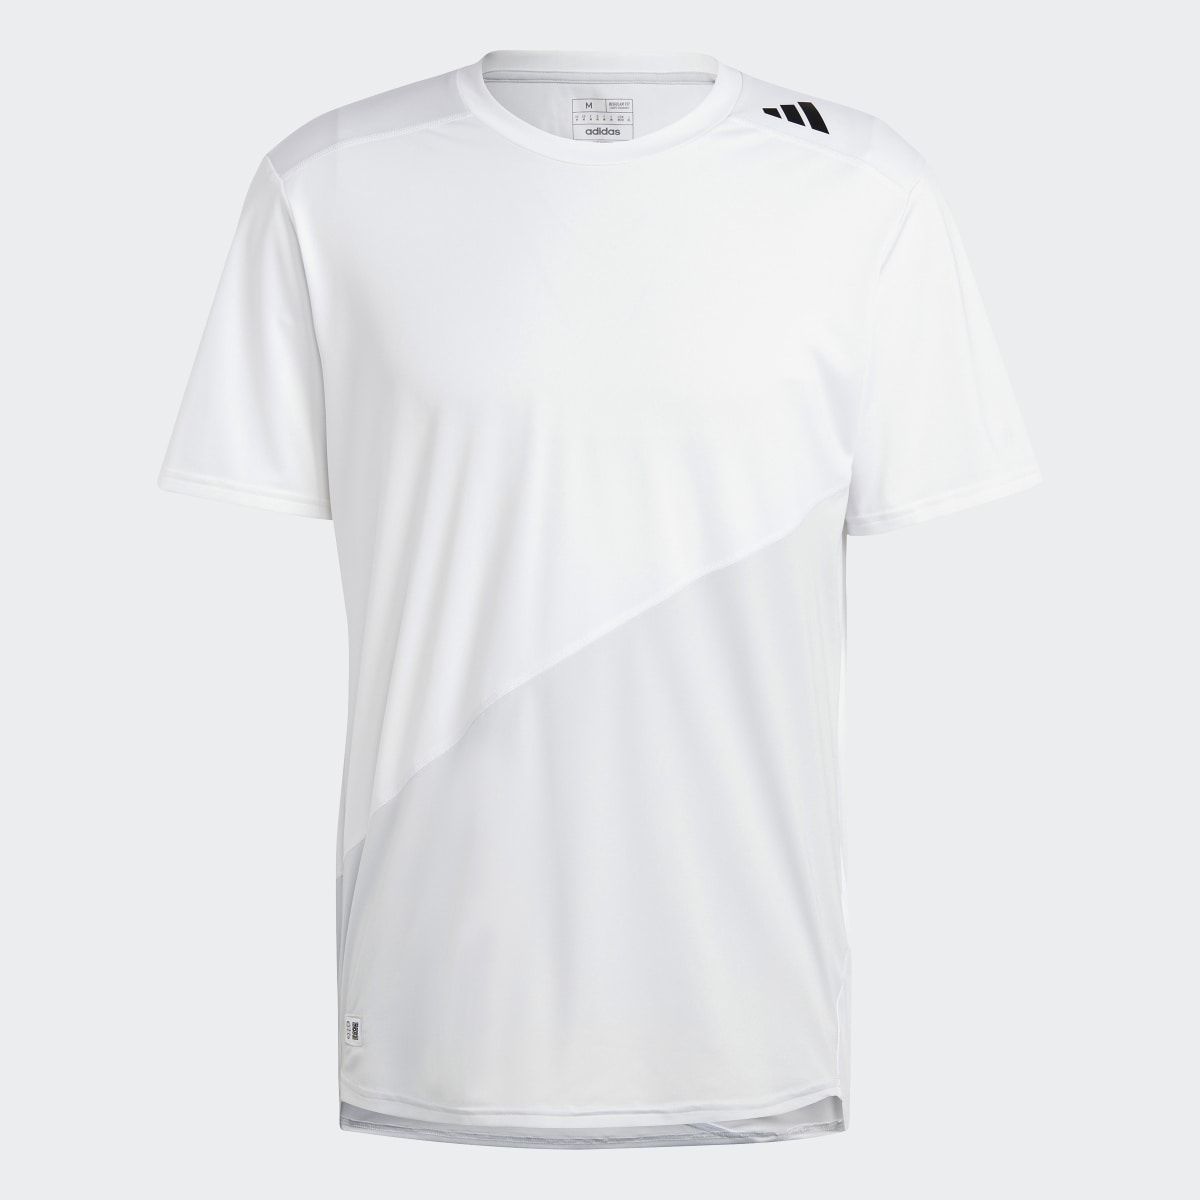 Adidas Made to be Remade Running T-Shirt. 5